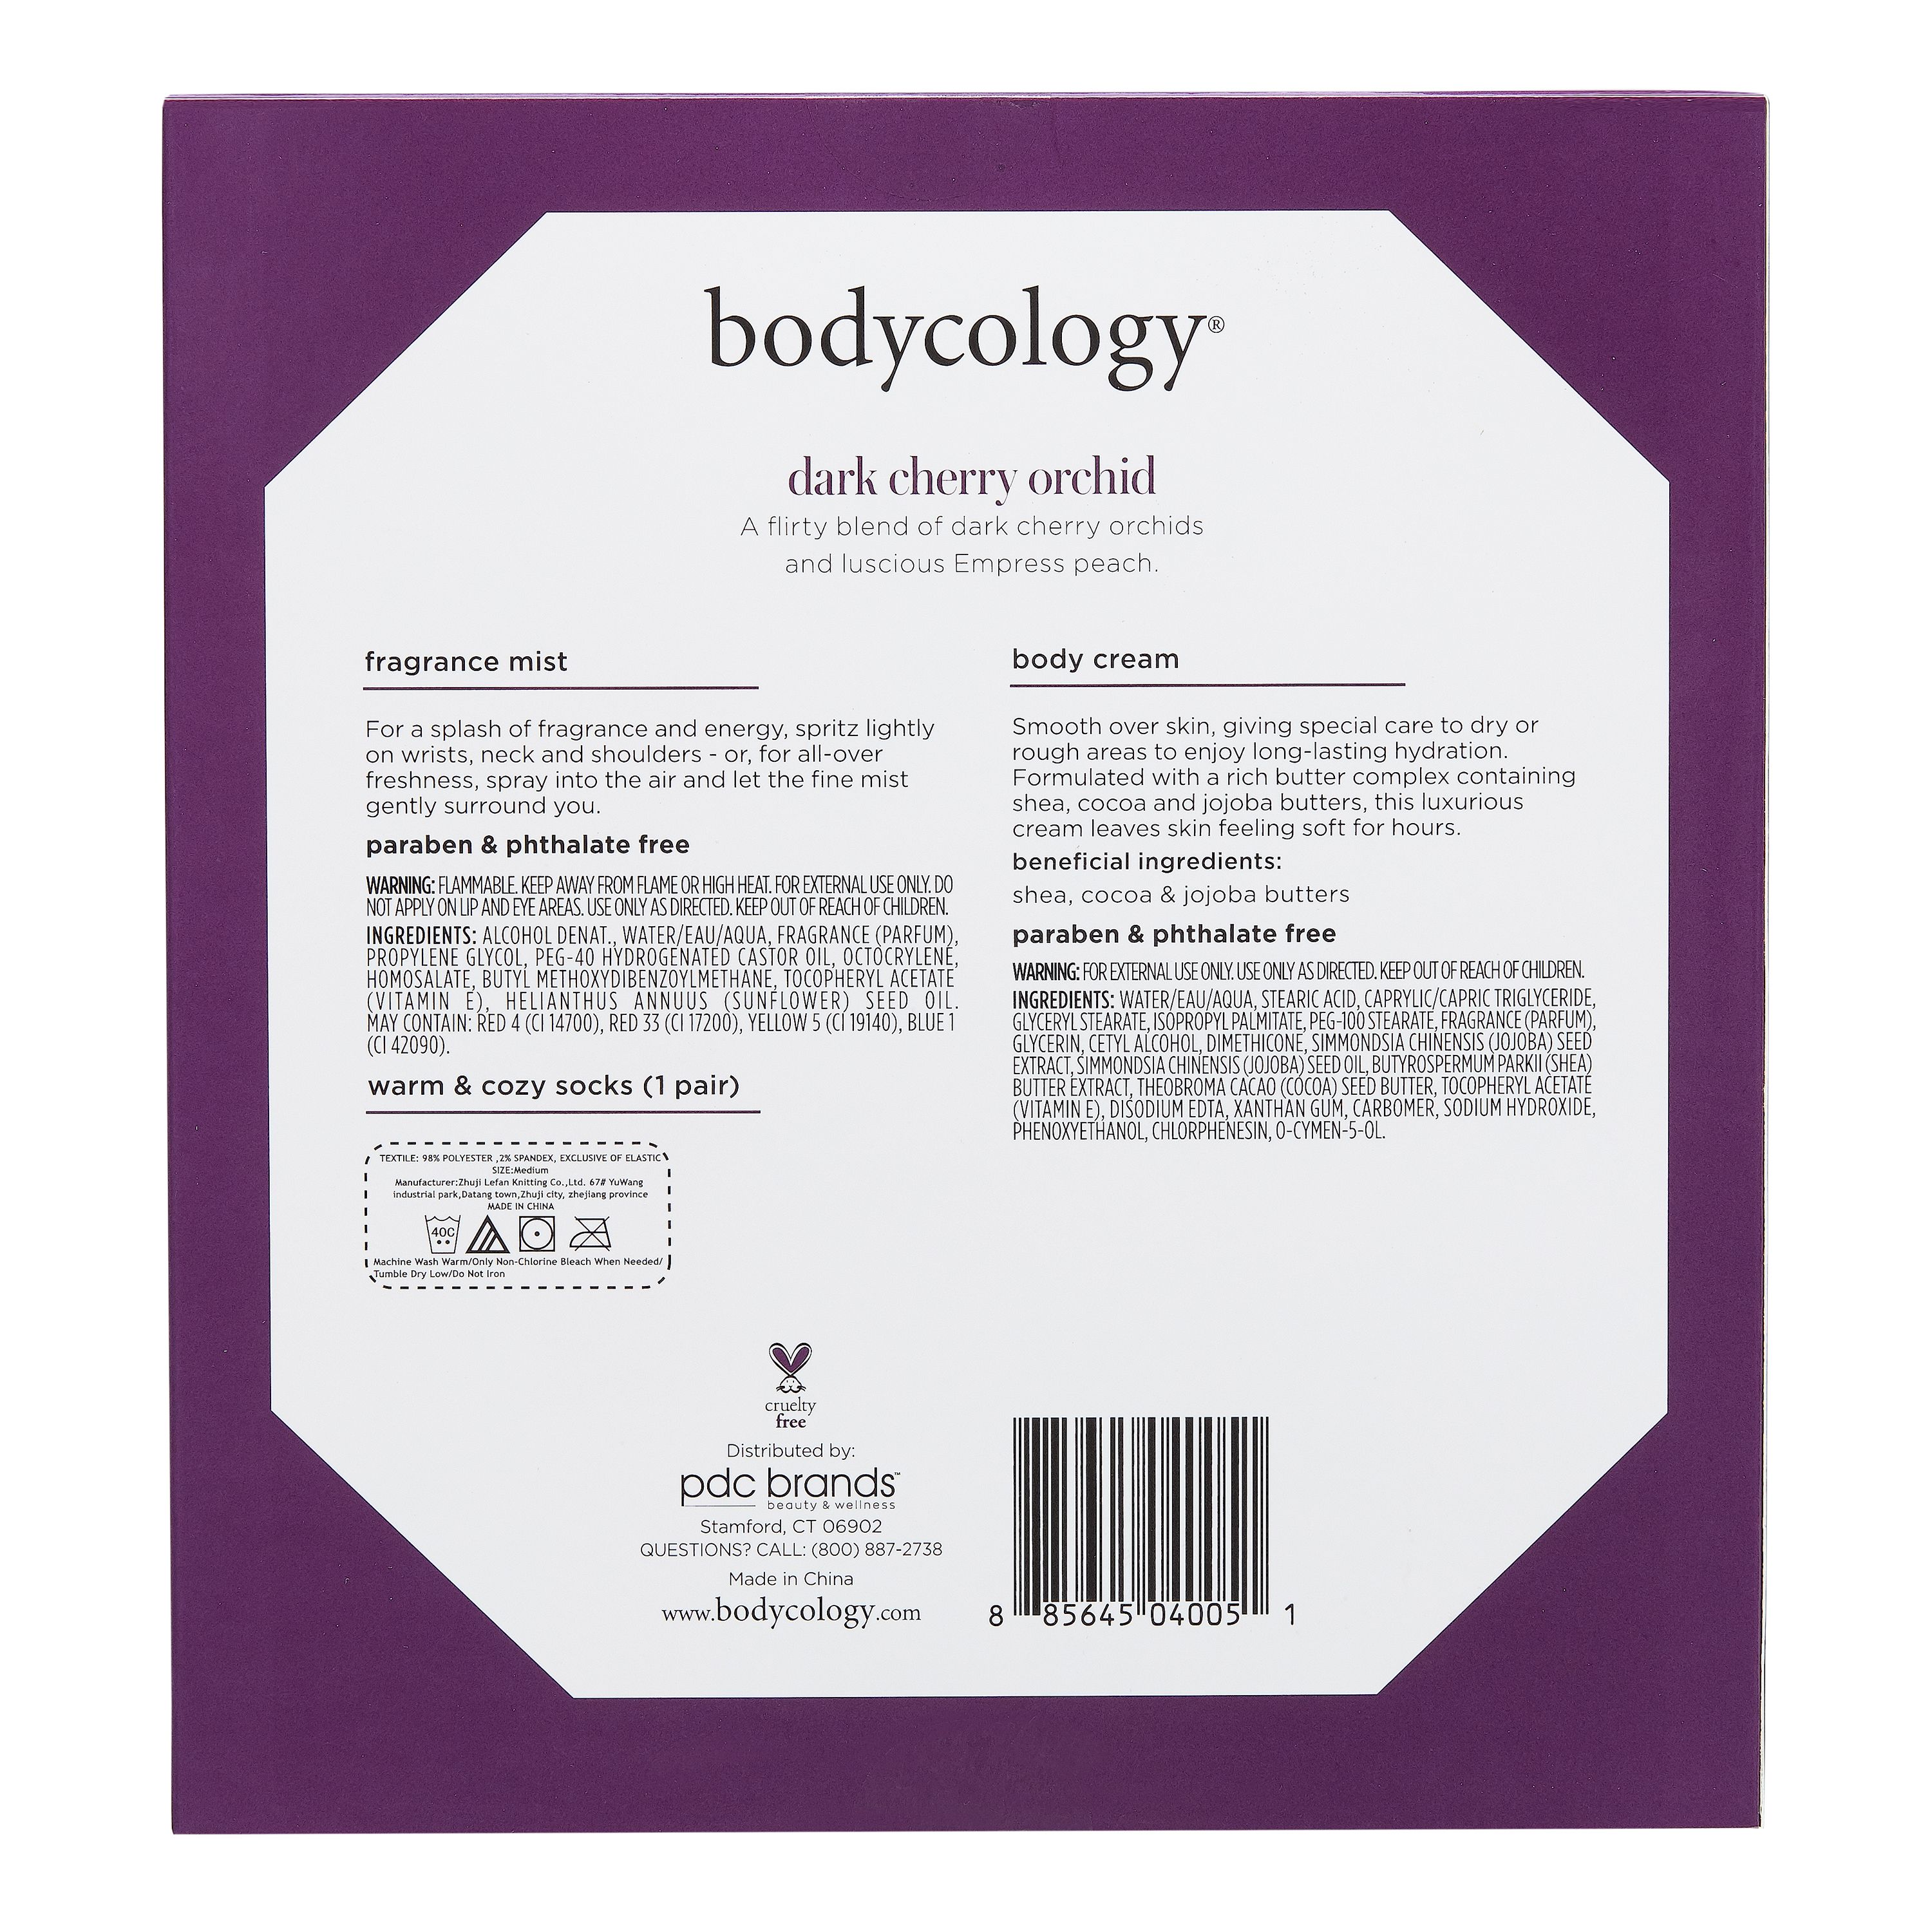 Bodycology 3-Piece Dark Cherry Orchid Fragrance Gift Set with Warm Socks - image 4 of 4